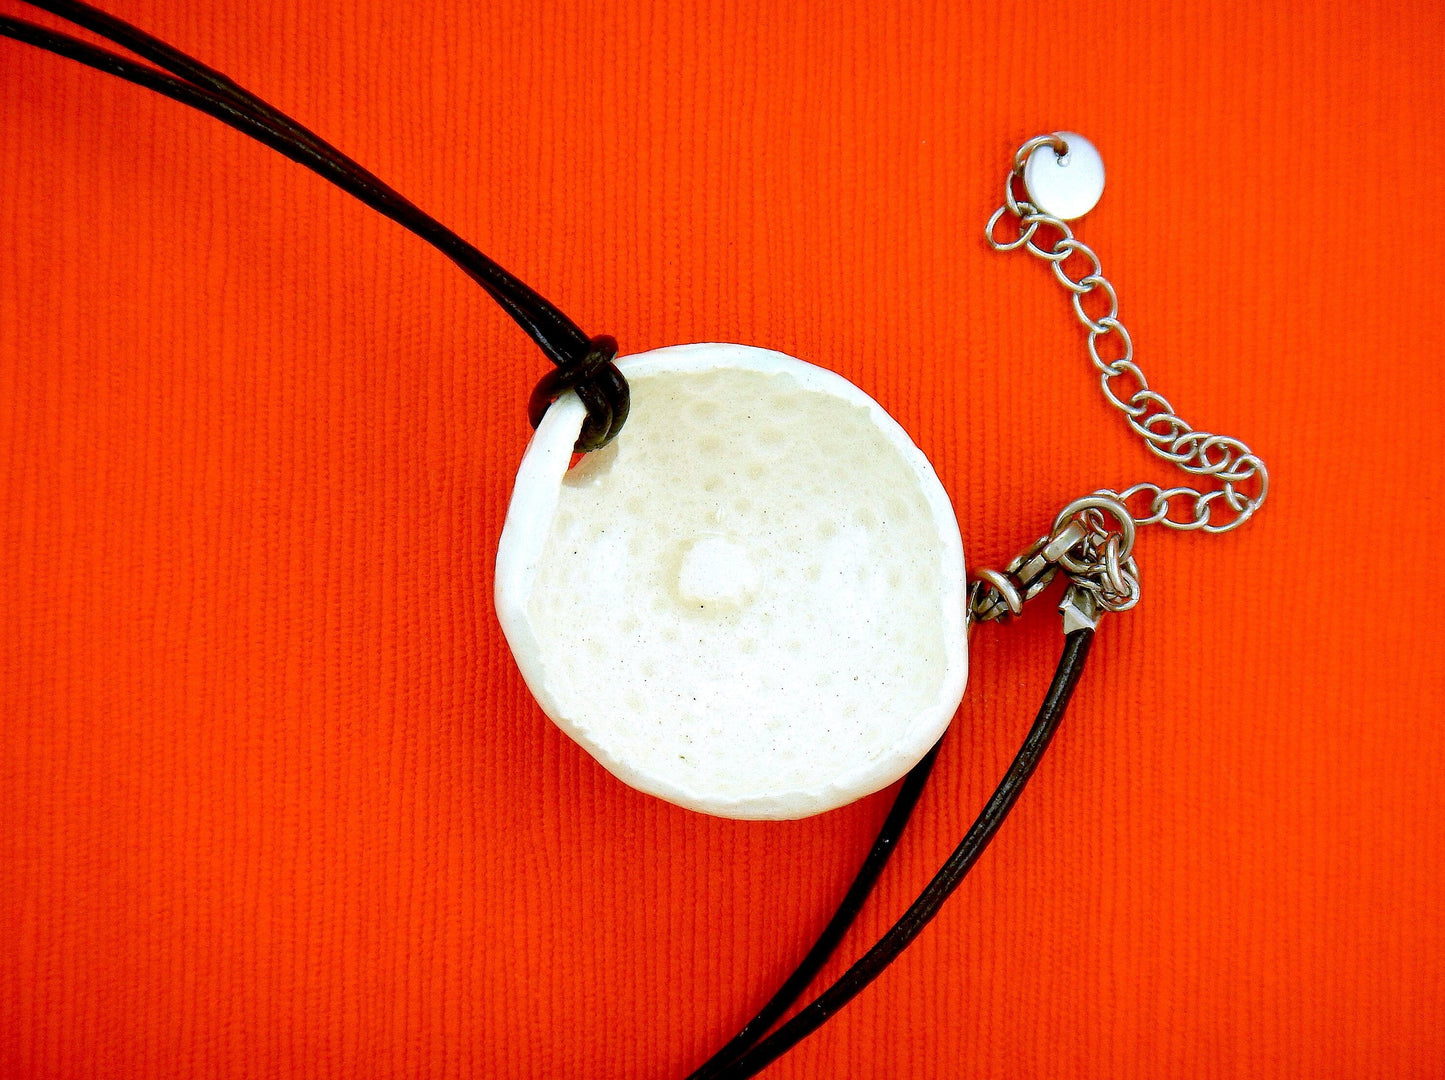 24-inch necklace with off-white ceramic sea urchin pendant handmade in Montreal, black leather cord, stainless steel clasp